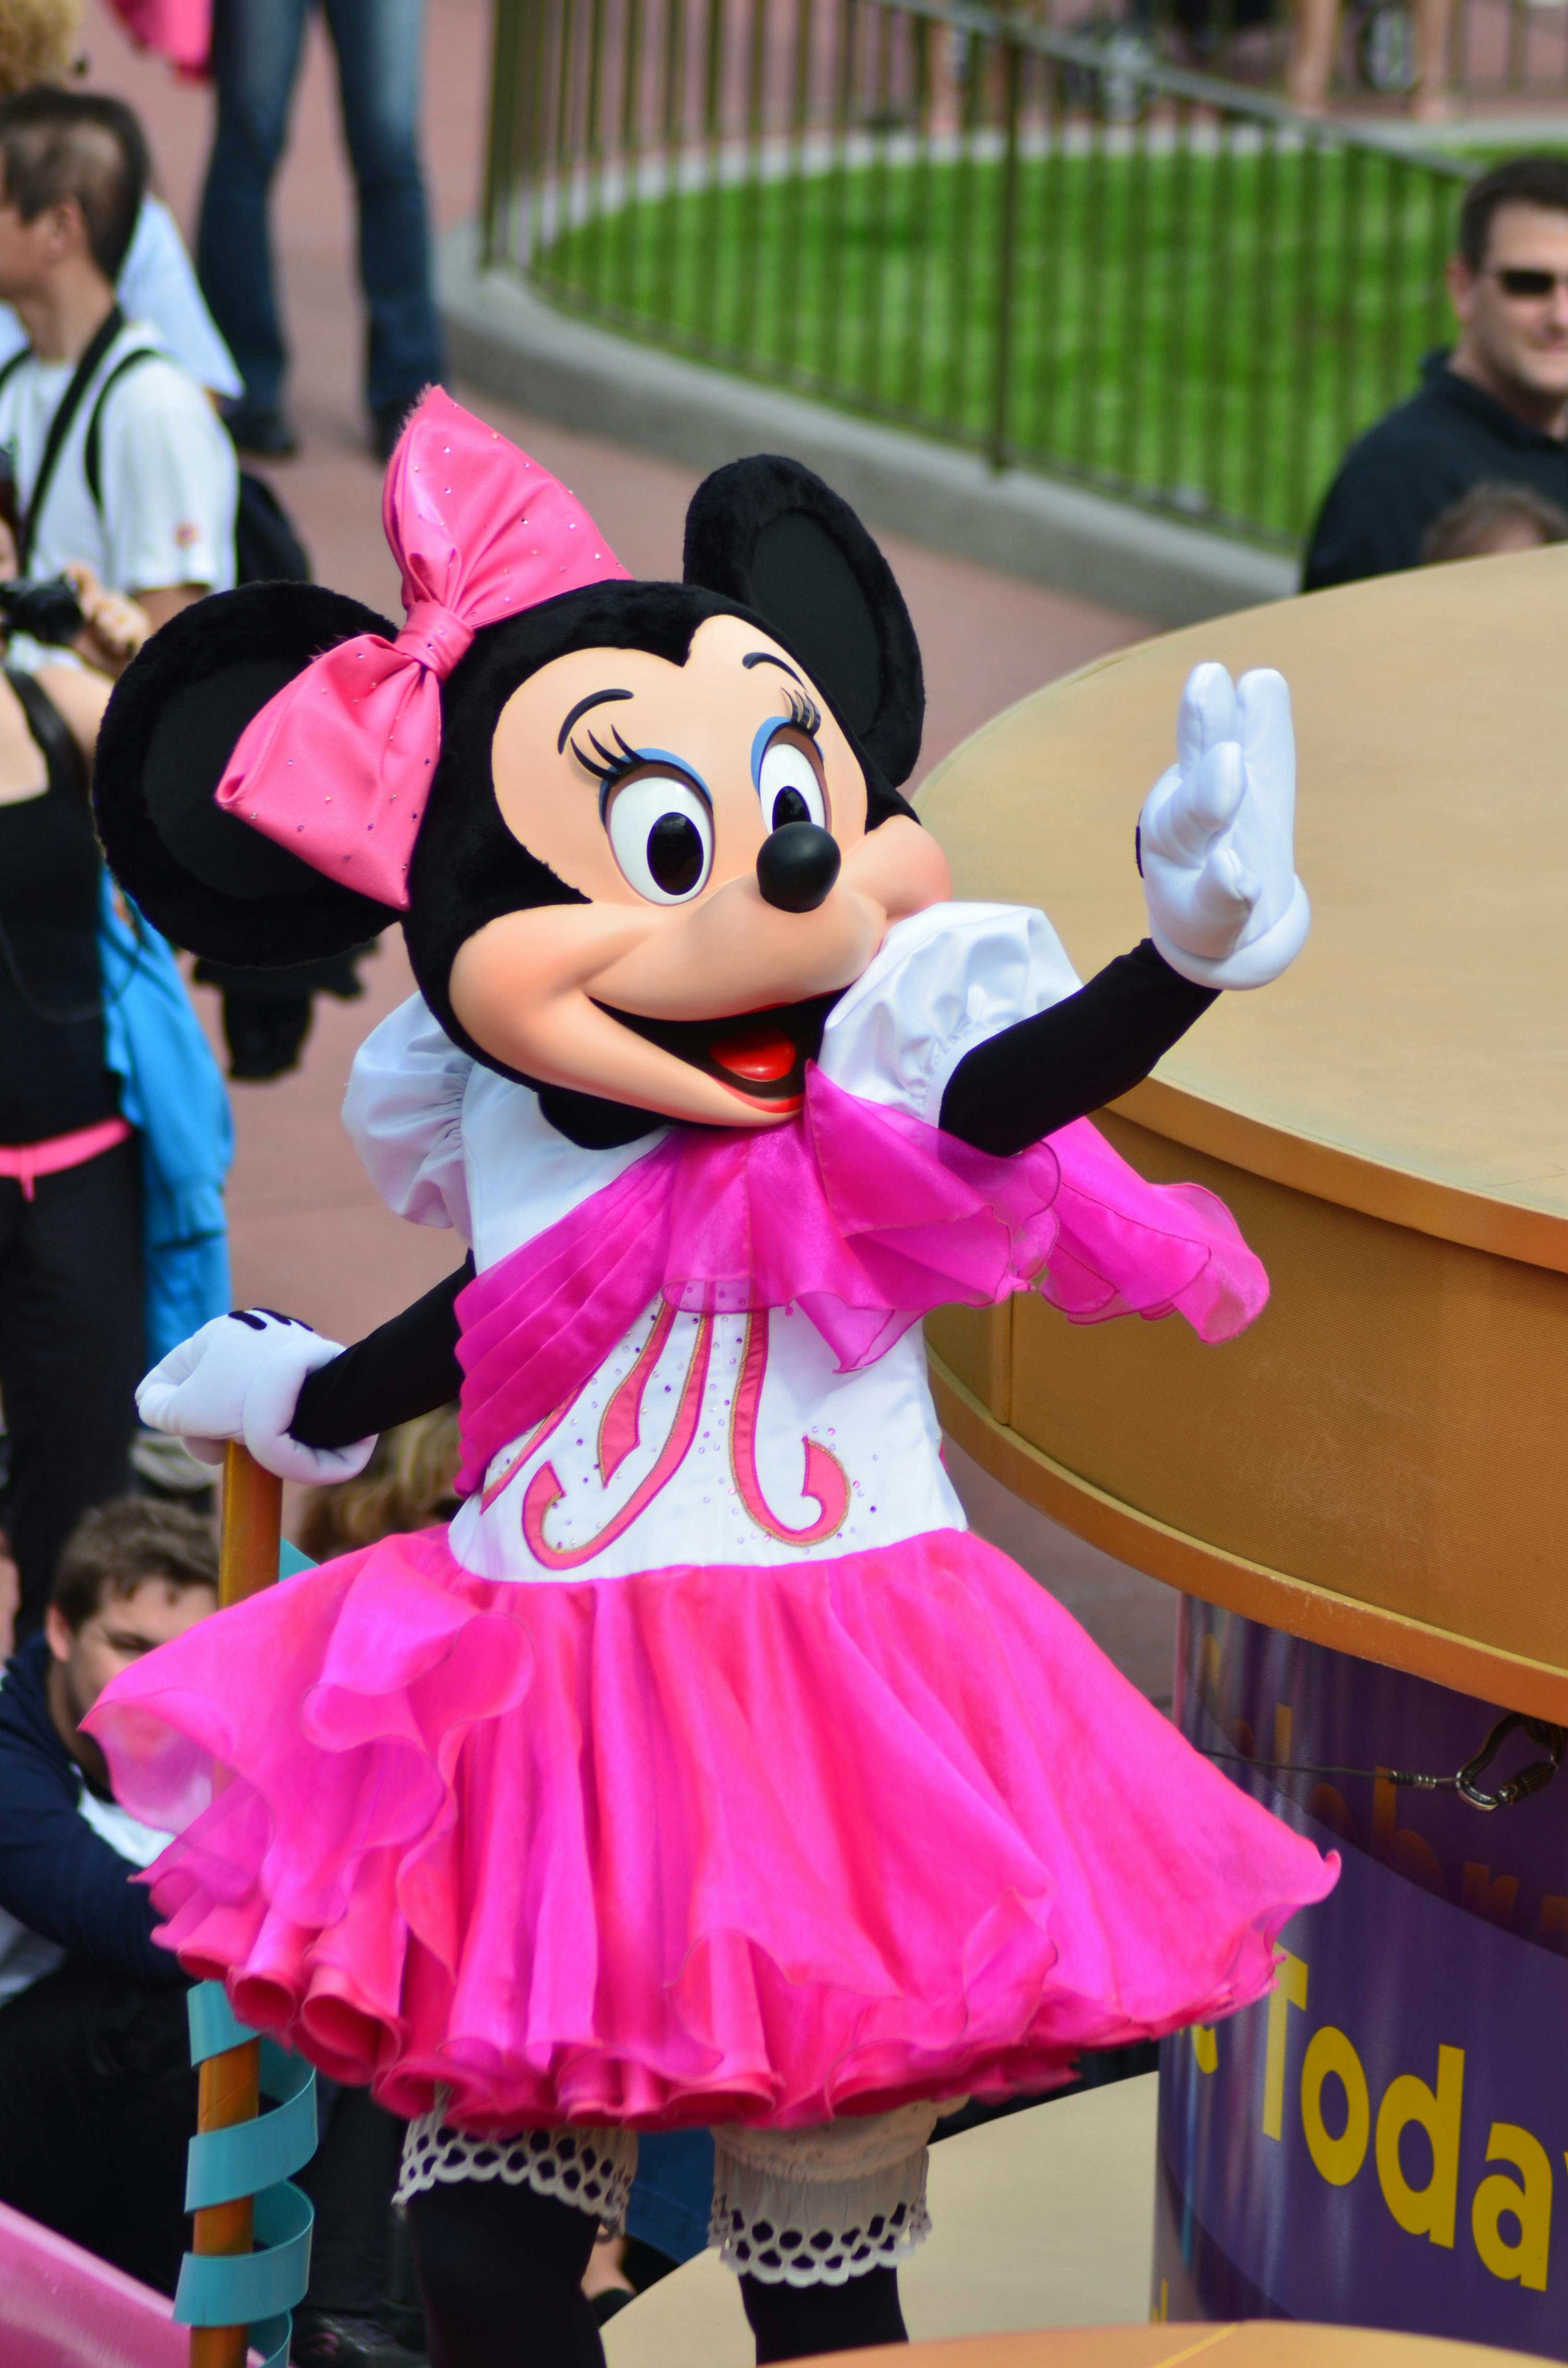 Someone dressed in a Minnie Mouse costume at a theme park | Source: Pexels